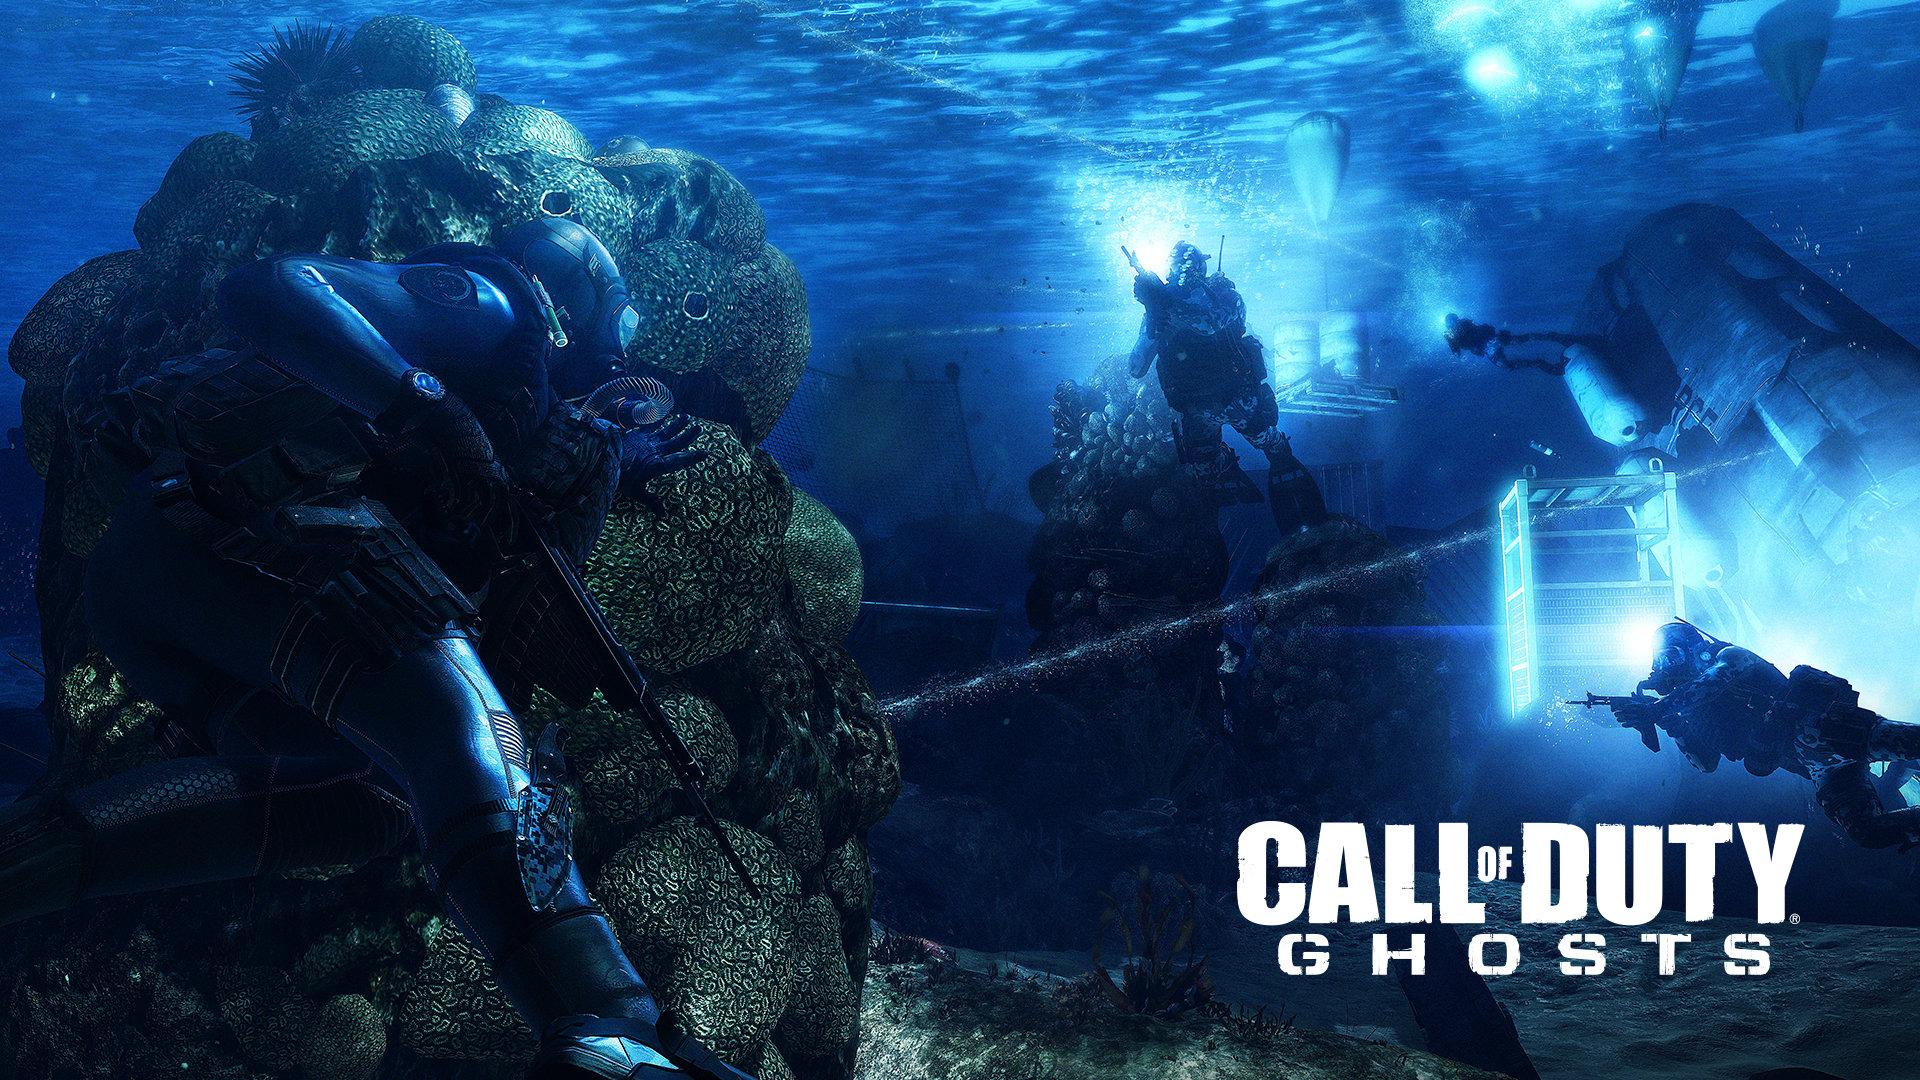 Call Of Duty Ghosts Wallpaper Of Duty Ghosts Scuba